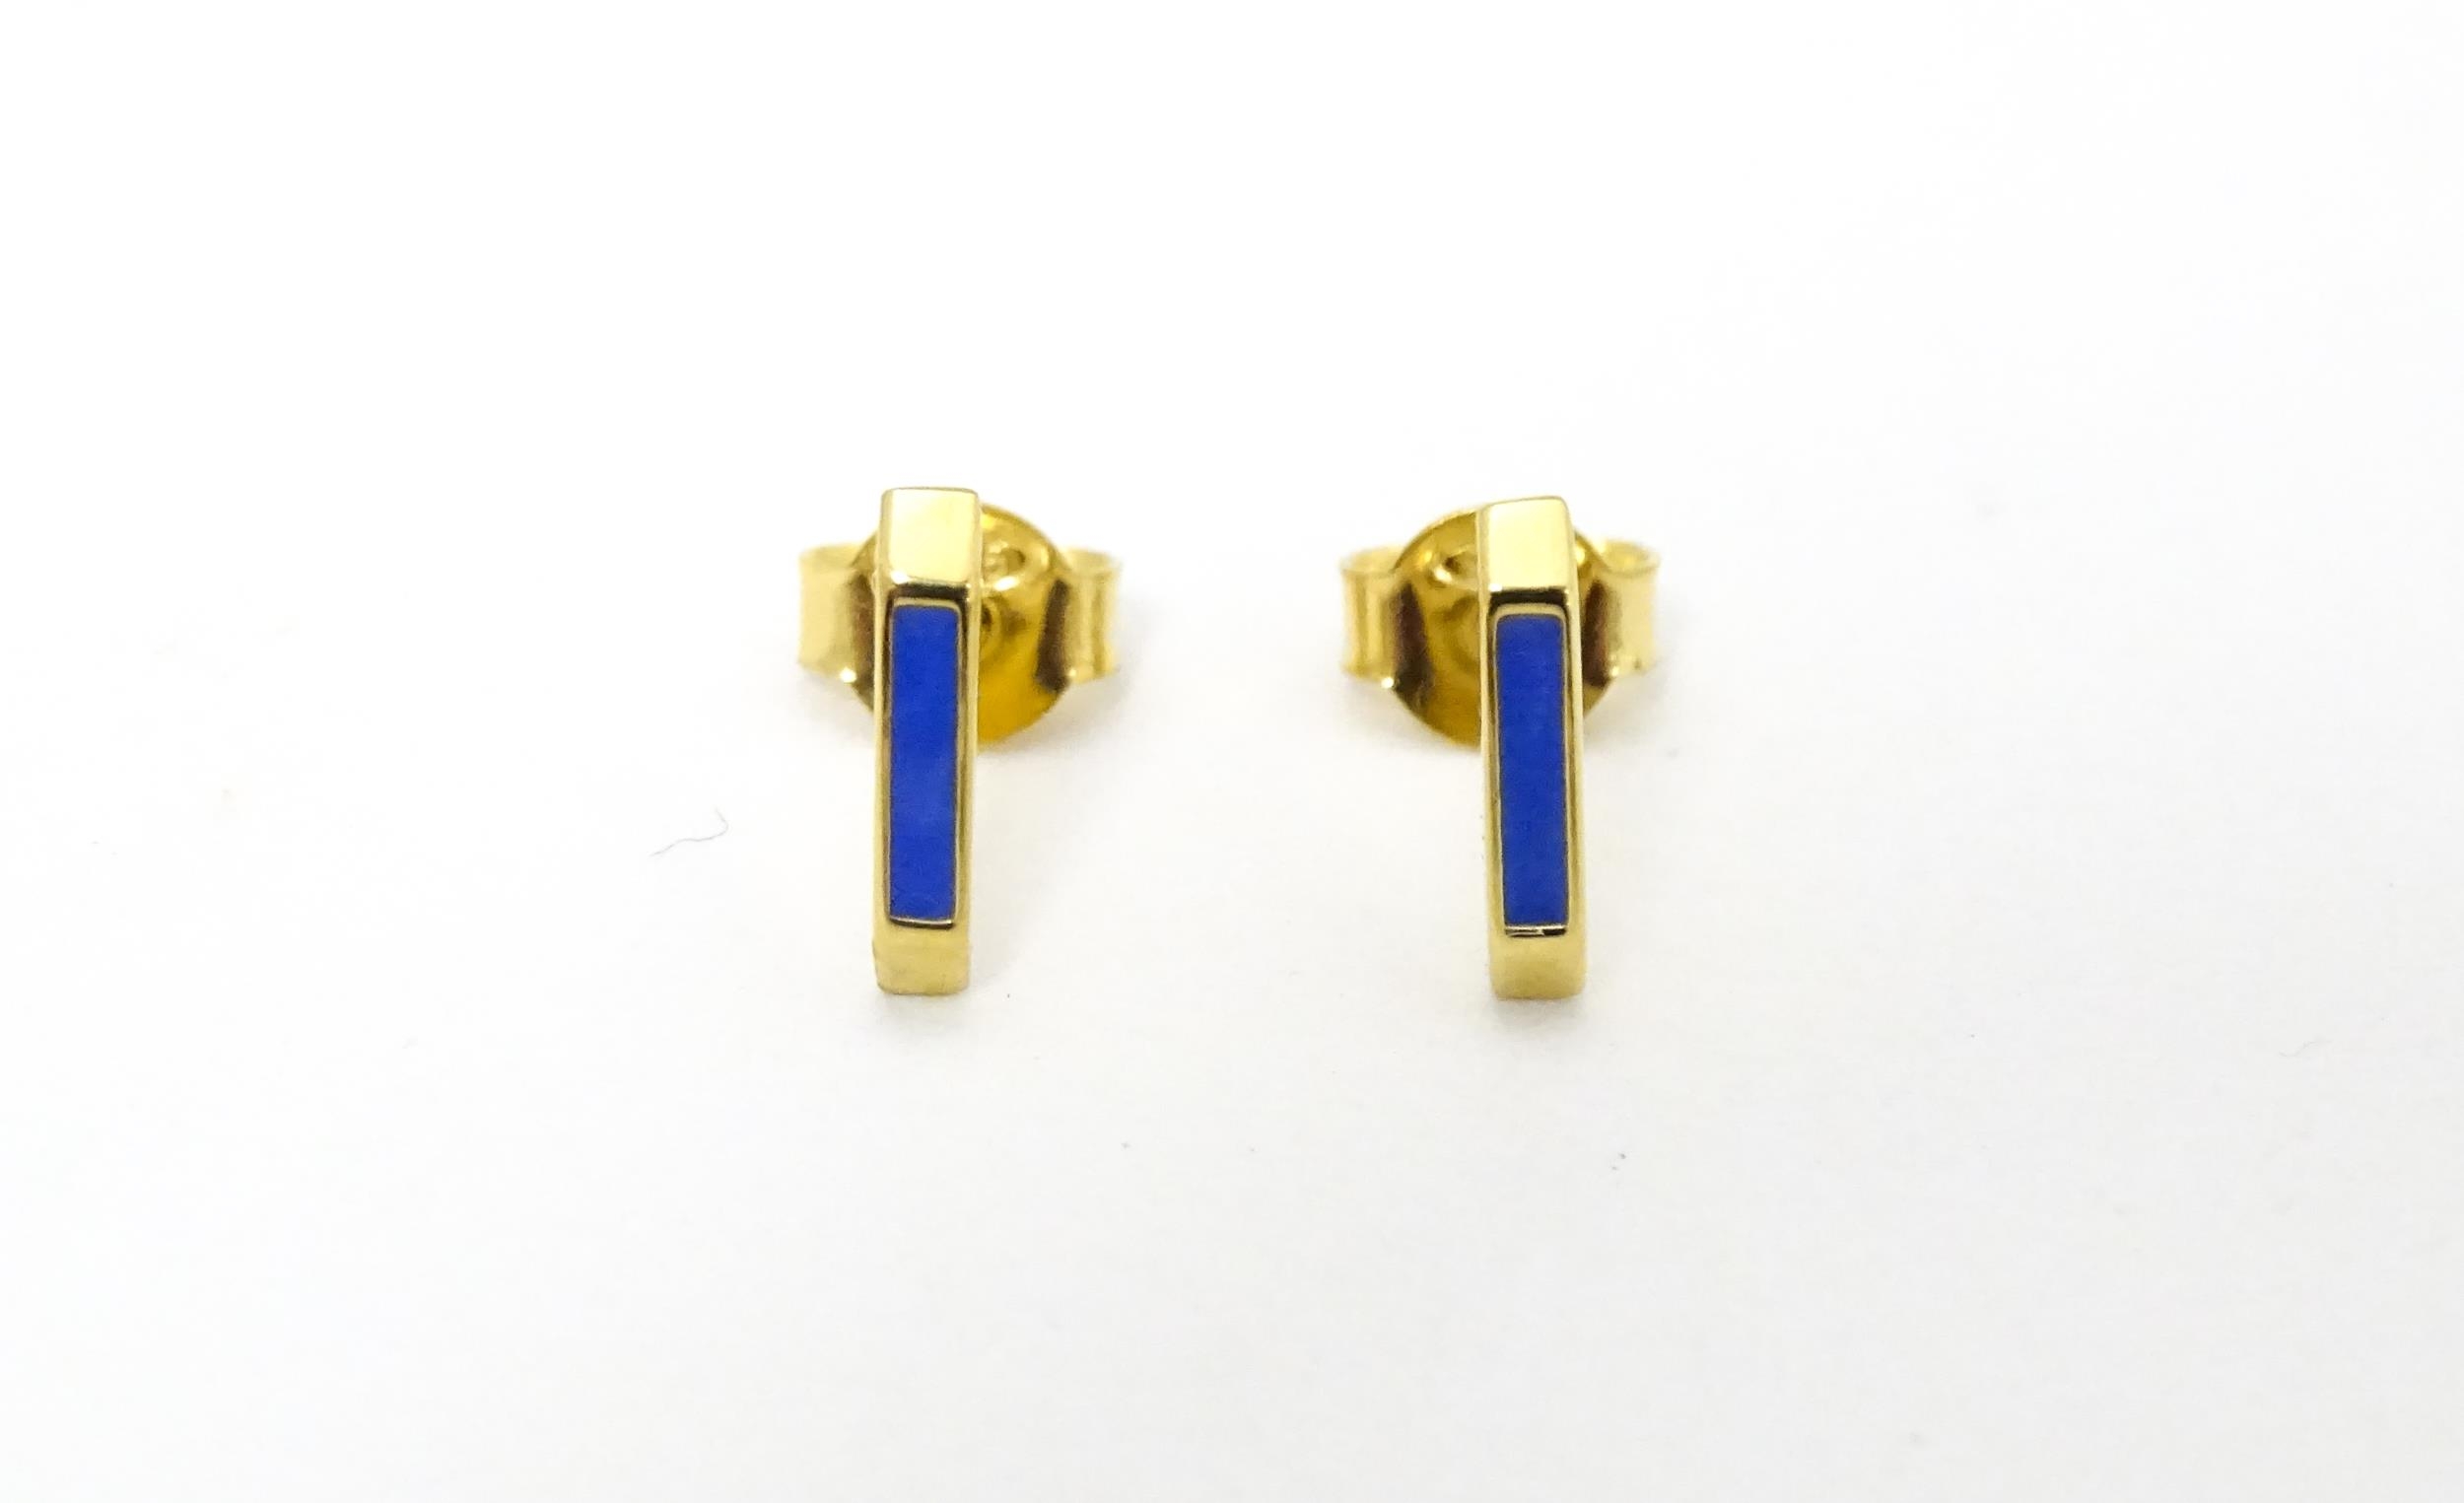 A pair of Astley Clarke 925 silver gilt stud earrings with blue enamel detail. Approx. 1/4" wide - Image 6 of 8